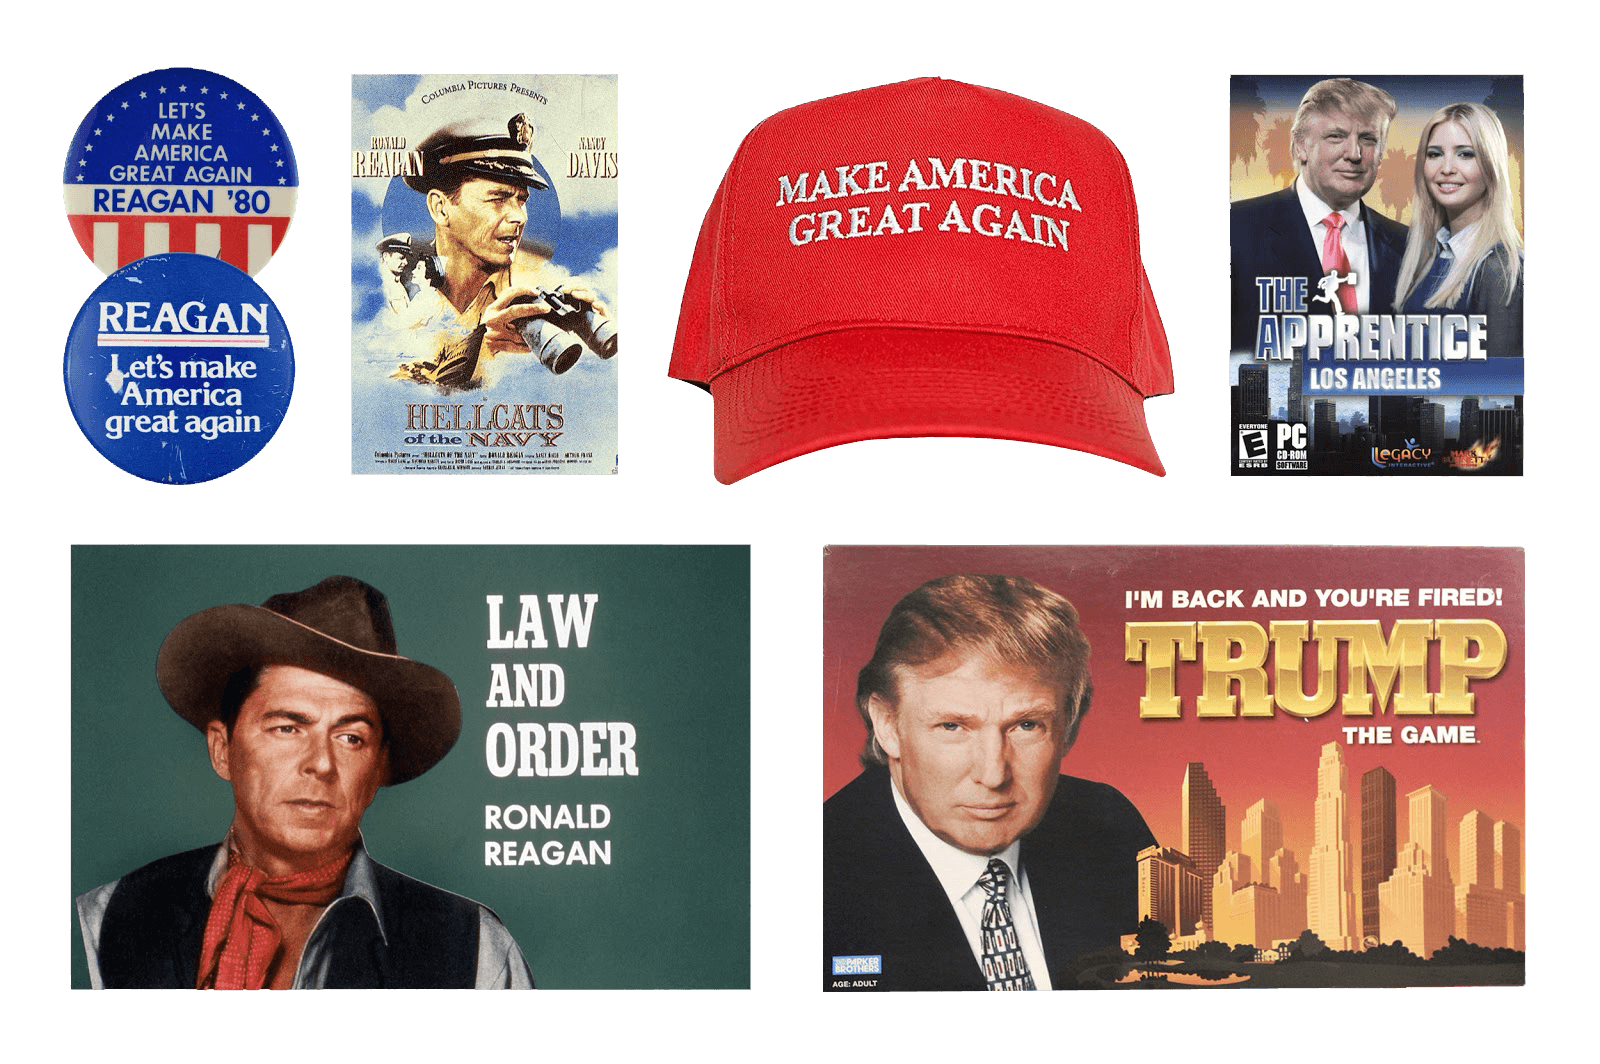 Trump and Reagan imagery juxtaposed together to show the similarities between the visual styles.